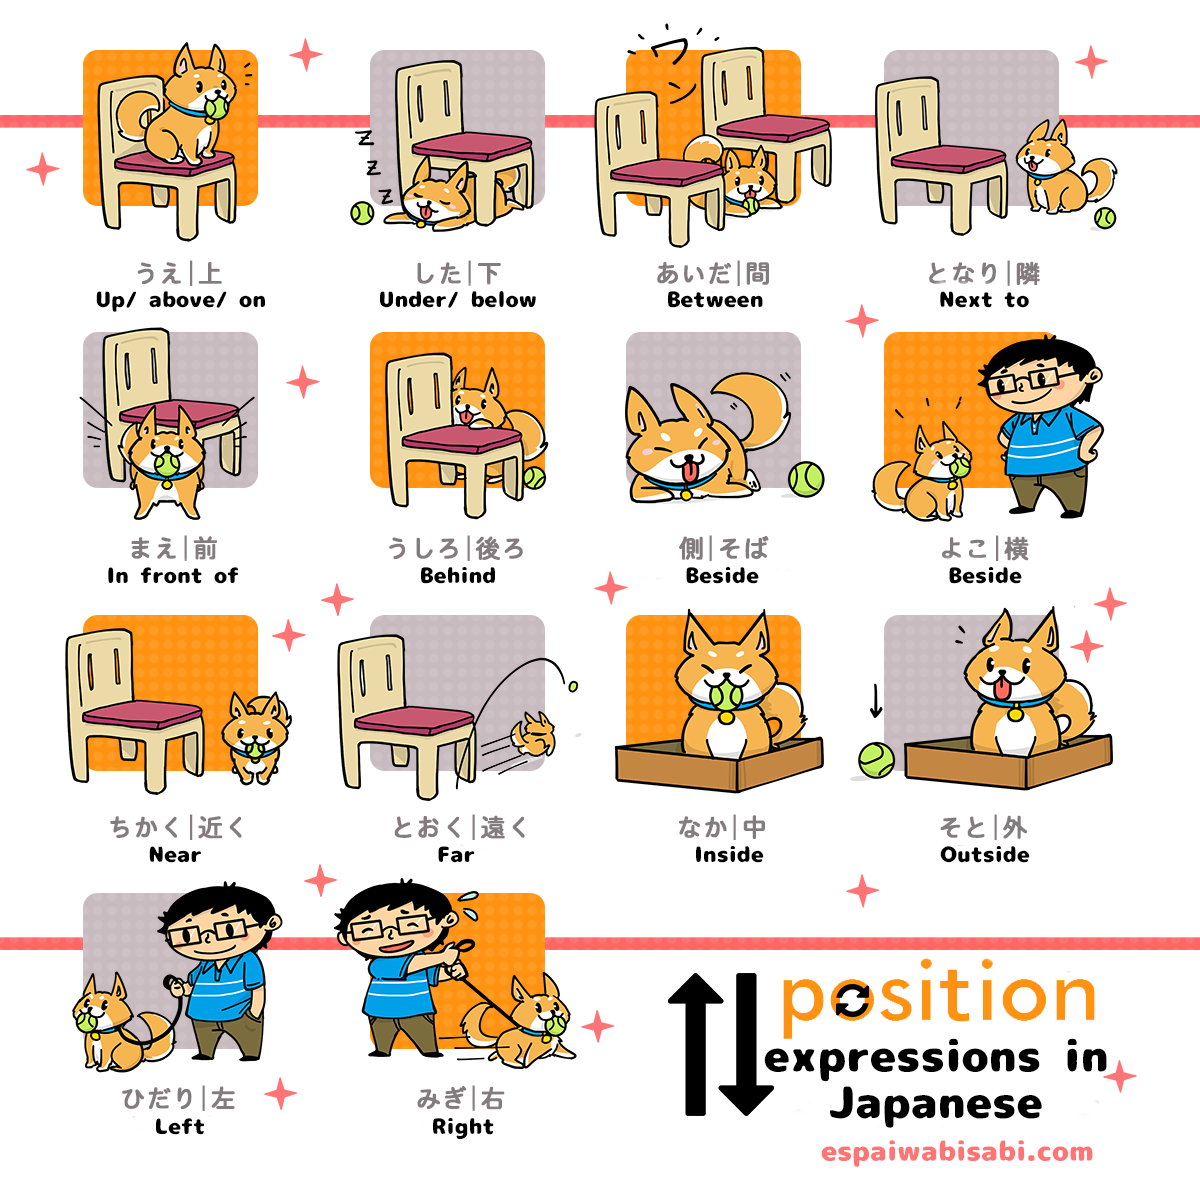 Position expressions in Japanese!